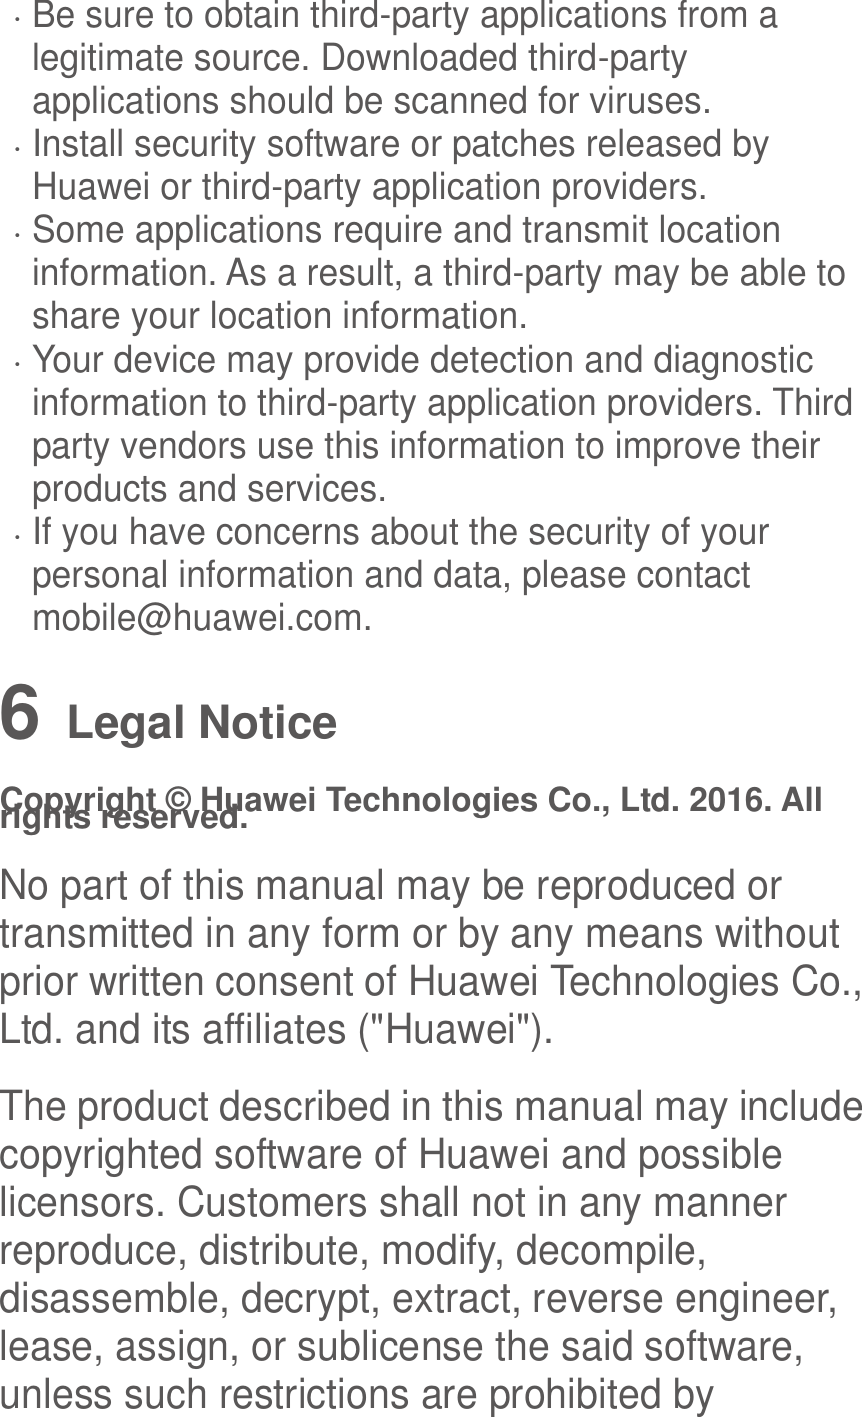   Be sure to obtain third-party applications from a legitimate source. Downloaded third-party applications should be scanned for viruses.  Install security software or patches released by Huawei or third-party application providers.  Some applications require and transmit location information. As a result, a third-party may be able to share your location information.  Your device may provide detection and diagnostic information to third-party application providers. Third party vendors use this information to improve their products and services.  If you have concerns about the security of your personal information and data, please contact mobile@huawei.com. 6   Legal Notice Copyright © Huawei Technologies Co., Ltd. 2016. All rights reserved. No part of this manual may be reproduced or transmitted in any form or by any means without prior written consent of Huawei Technologies Co., Ltd. and its affiliates (&quot;Huawei&quot;). The product described in this manual may include copyrighted software of Huawei and possible licensors. Customers shall not in any manner reproduce, distribute, modify, decompile, disassemble, decrypt, extract, reverse engineer, lease, assign, or sublicense the said software, unless such restrictions are prohibited by 